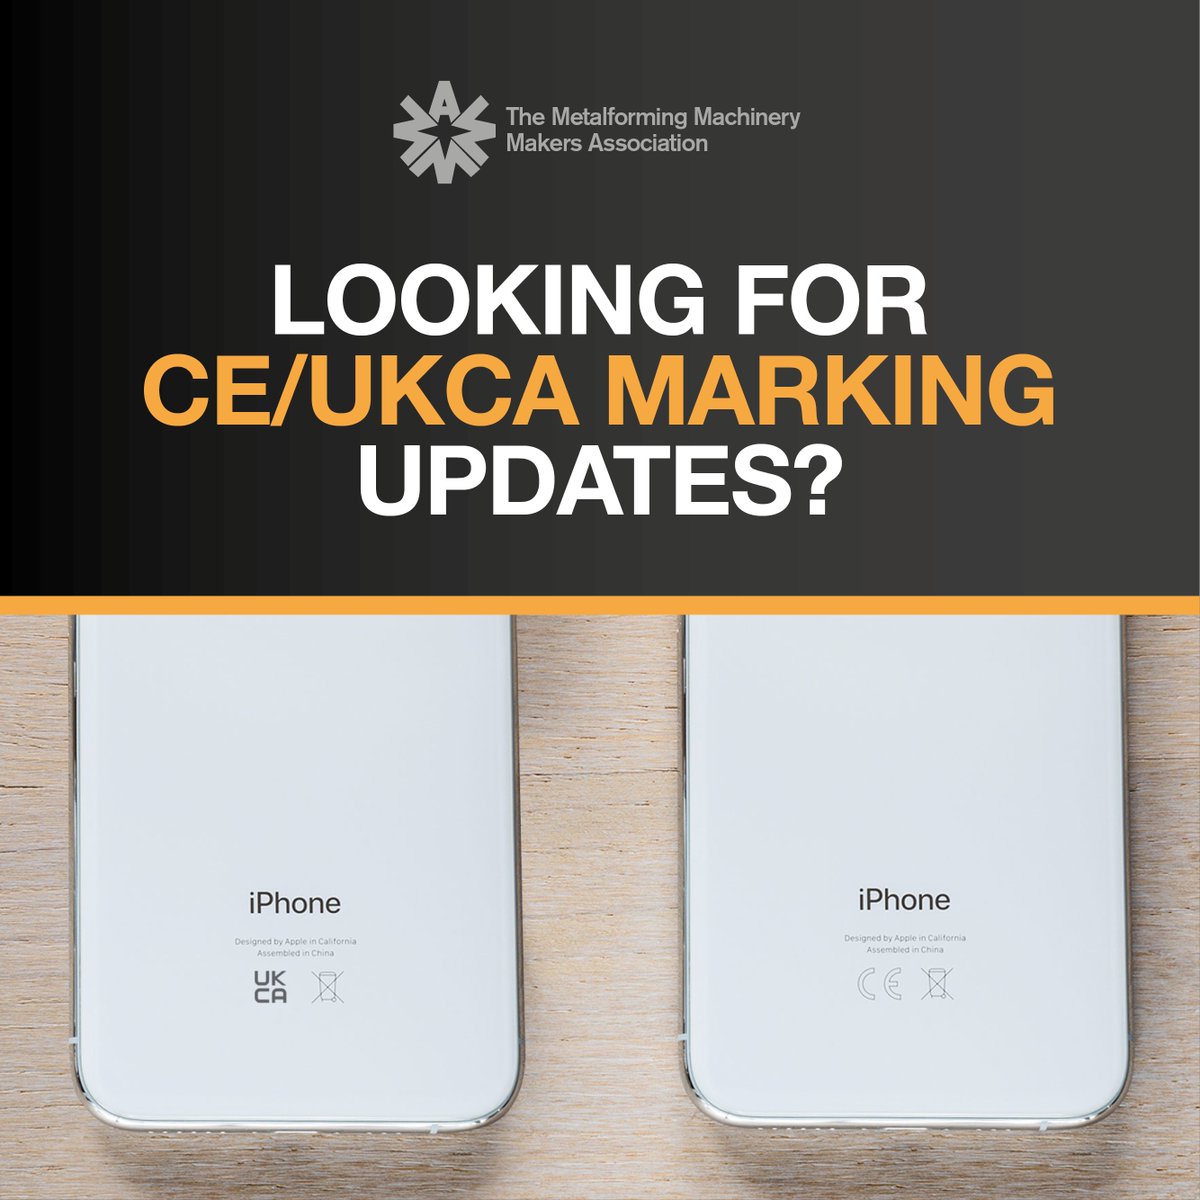 Looking for more information on CA/CE Marking?

Then take a look at our dedicated page, providing you with the key updates such as:

⚙️ What the #CAmarking is
⚙️ What it means for #CEmarking
⚙️ Key dates to know

Read more ➡️ bit.ly/3HIaEpR

#MMMA #ukmfg #manufacturing